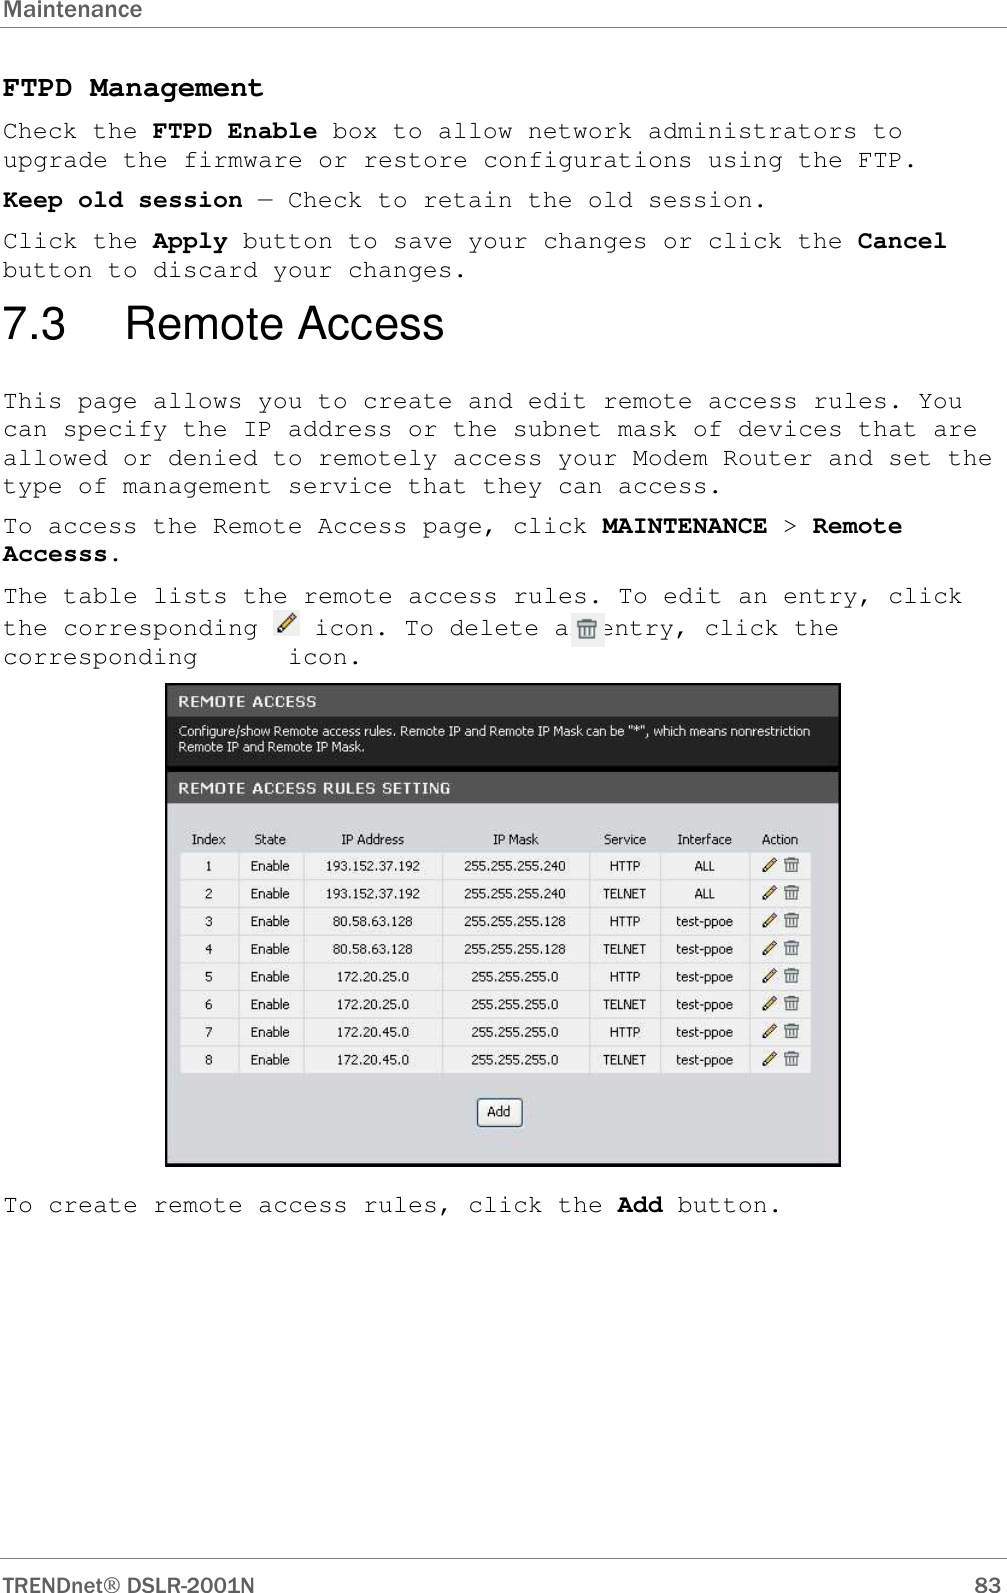 Maintenance      TRENDnet DSLR-2001N        83 FTPD Management Check the FTPD Enable box to allow network administrators to upgrade the firmware or restore configurations using the FTP. Keep old session — Check to retain the old session. Click the Apply button to save your changes or click the Cancel button to discard your changes. 7.3  Remote Access This page allows you to create and edit remote access rules. You can specify the IP address or the subnet mask of devices that are allowed or denied to remotely access your Modem Router and set the type of management service that they can access. To access the Remote Access page, click MAINTENANCE &gt; Remote Accesss. The table lists the remote access rules. To edit an entry, click the corresponding   icon. To delete an entry, click the corresponding      icon.  To create remote access rules, click the Add button. 